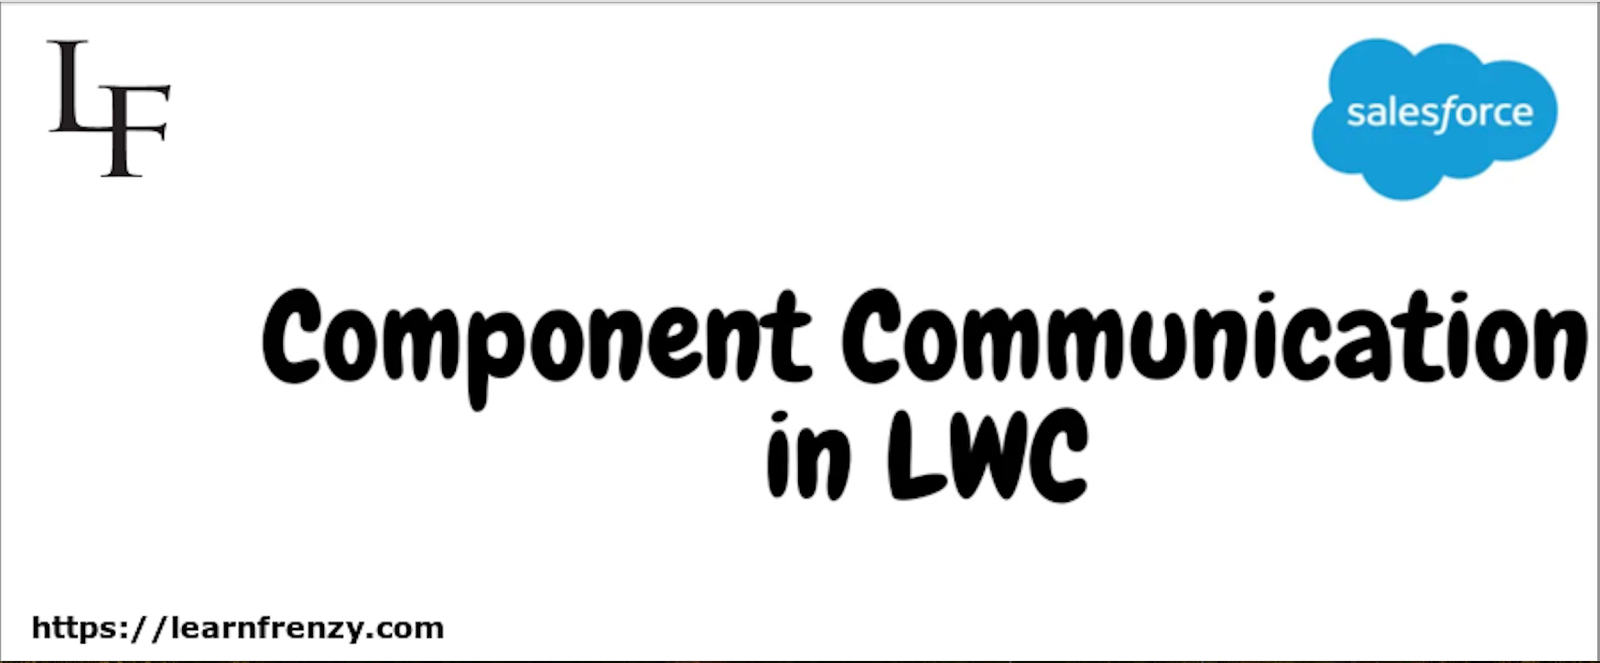 Component Communication in LWC